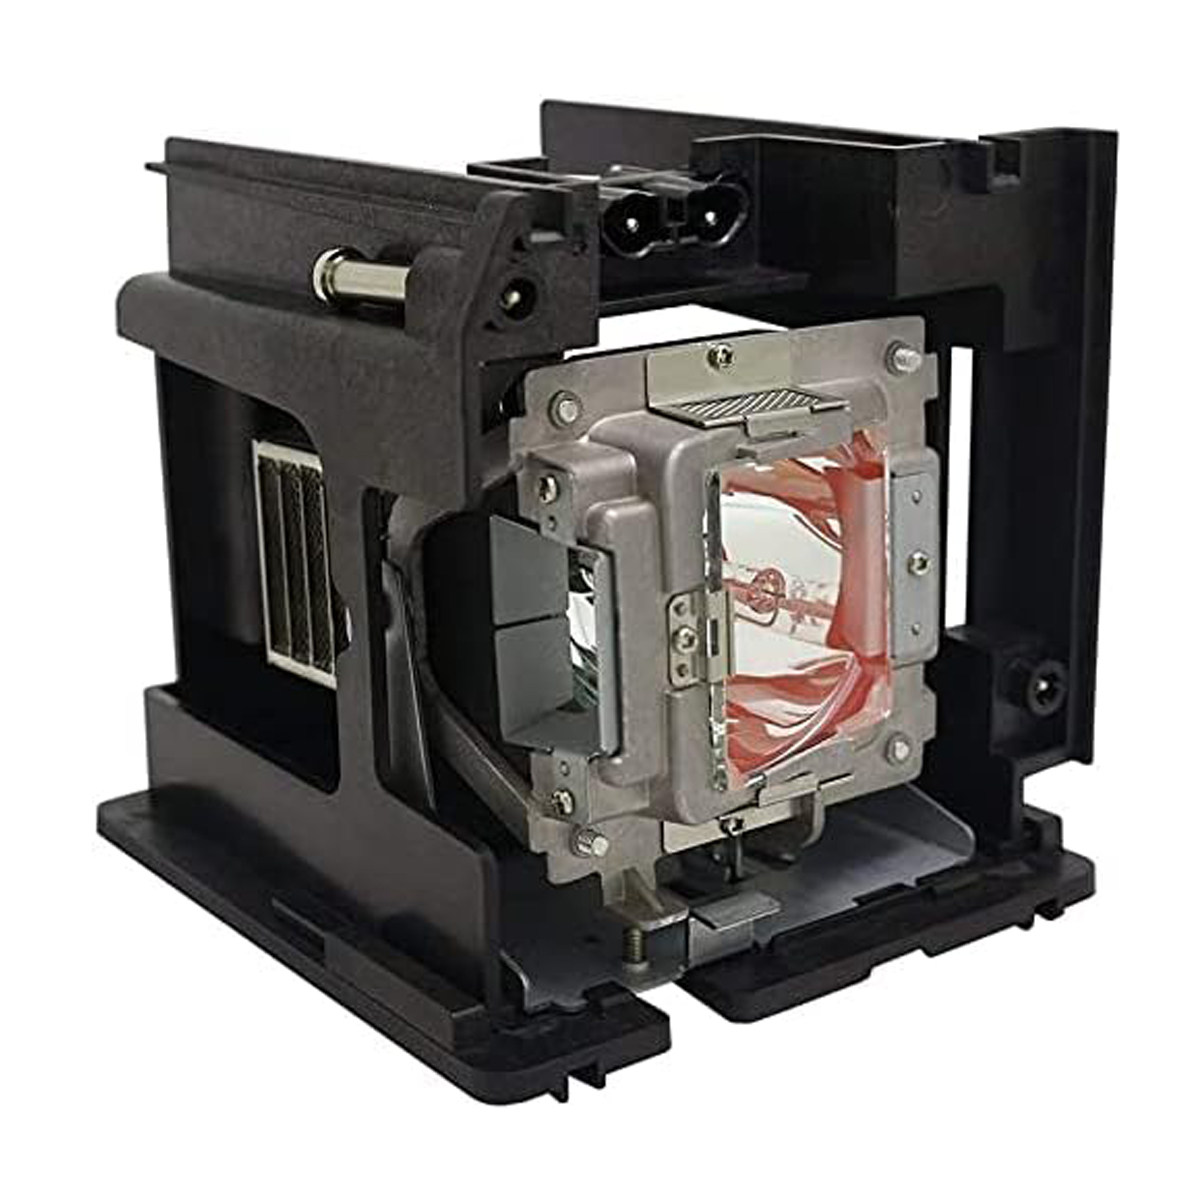 Replacement Projector lamp BL-FP280D For OPTOMA EX762 TX762